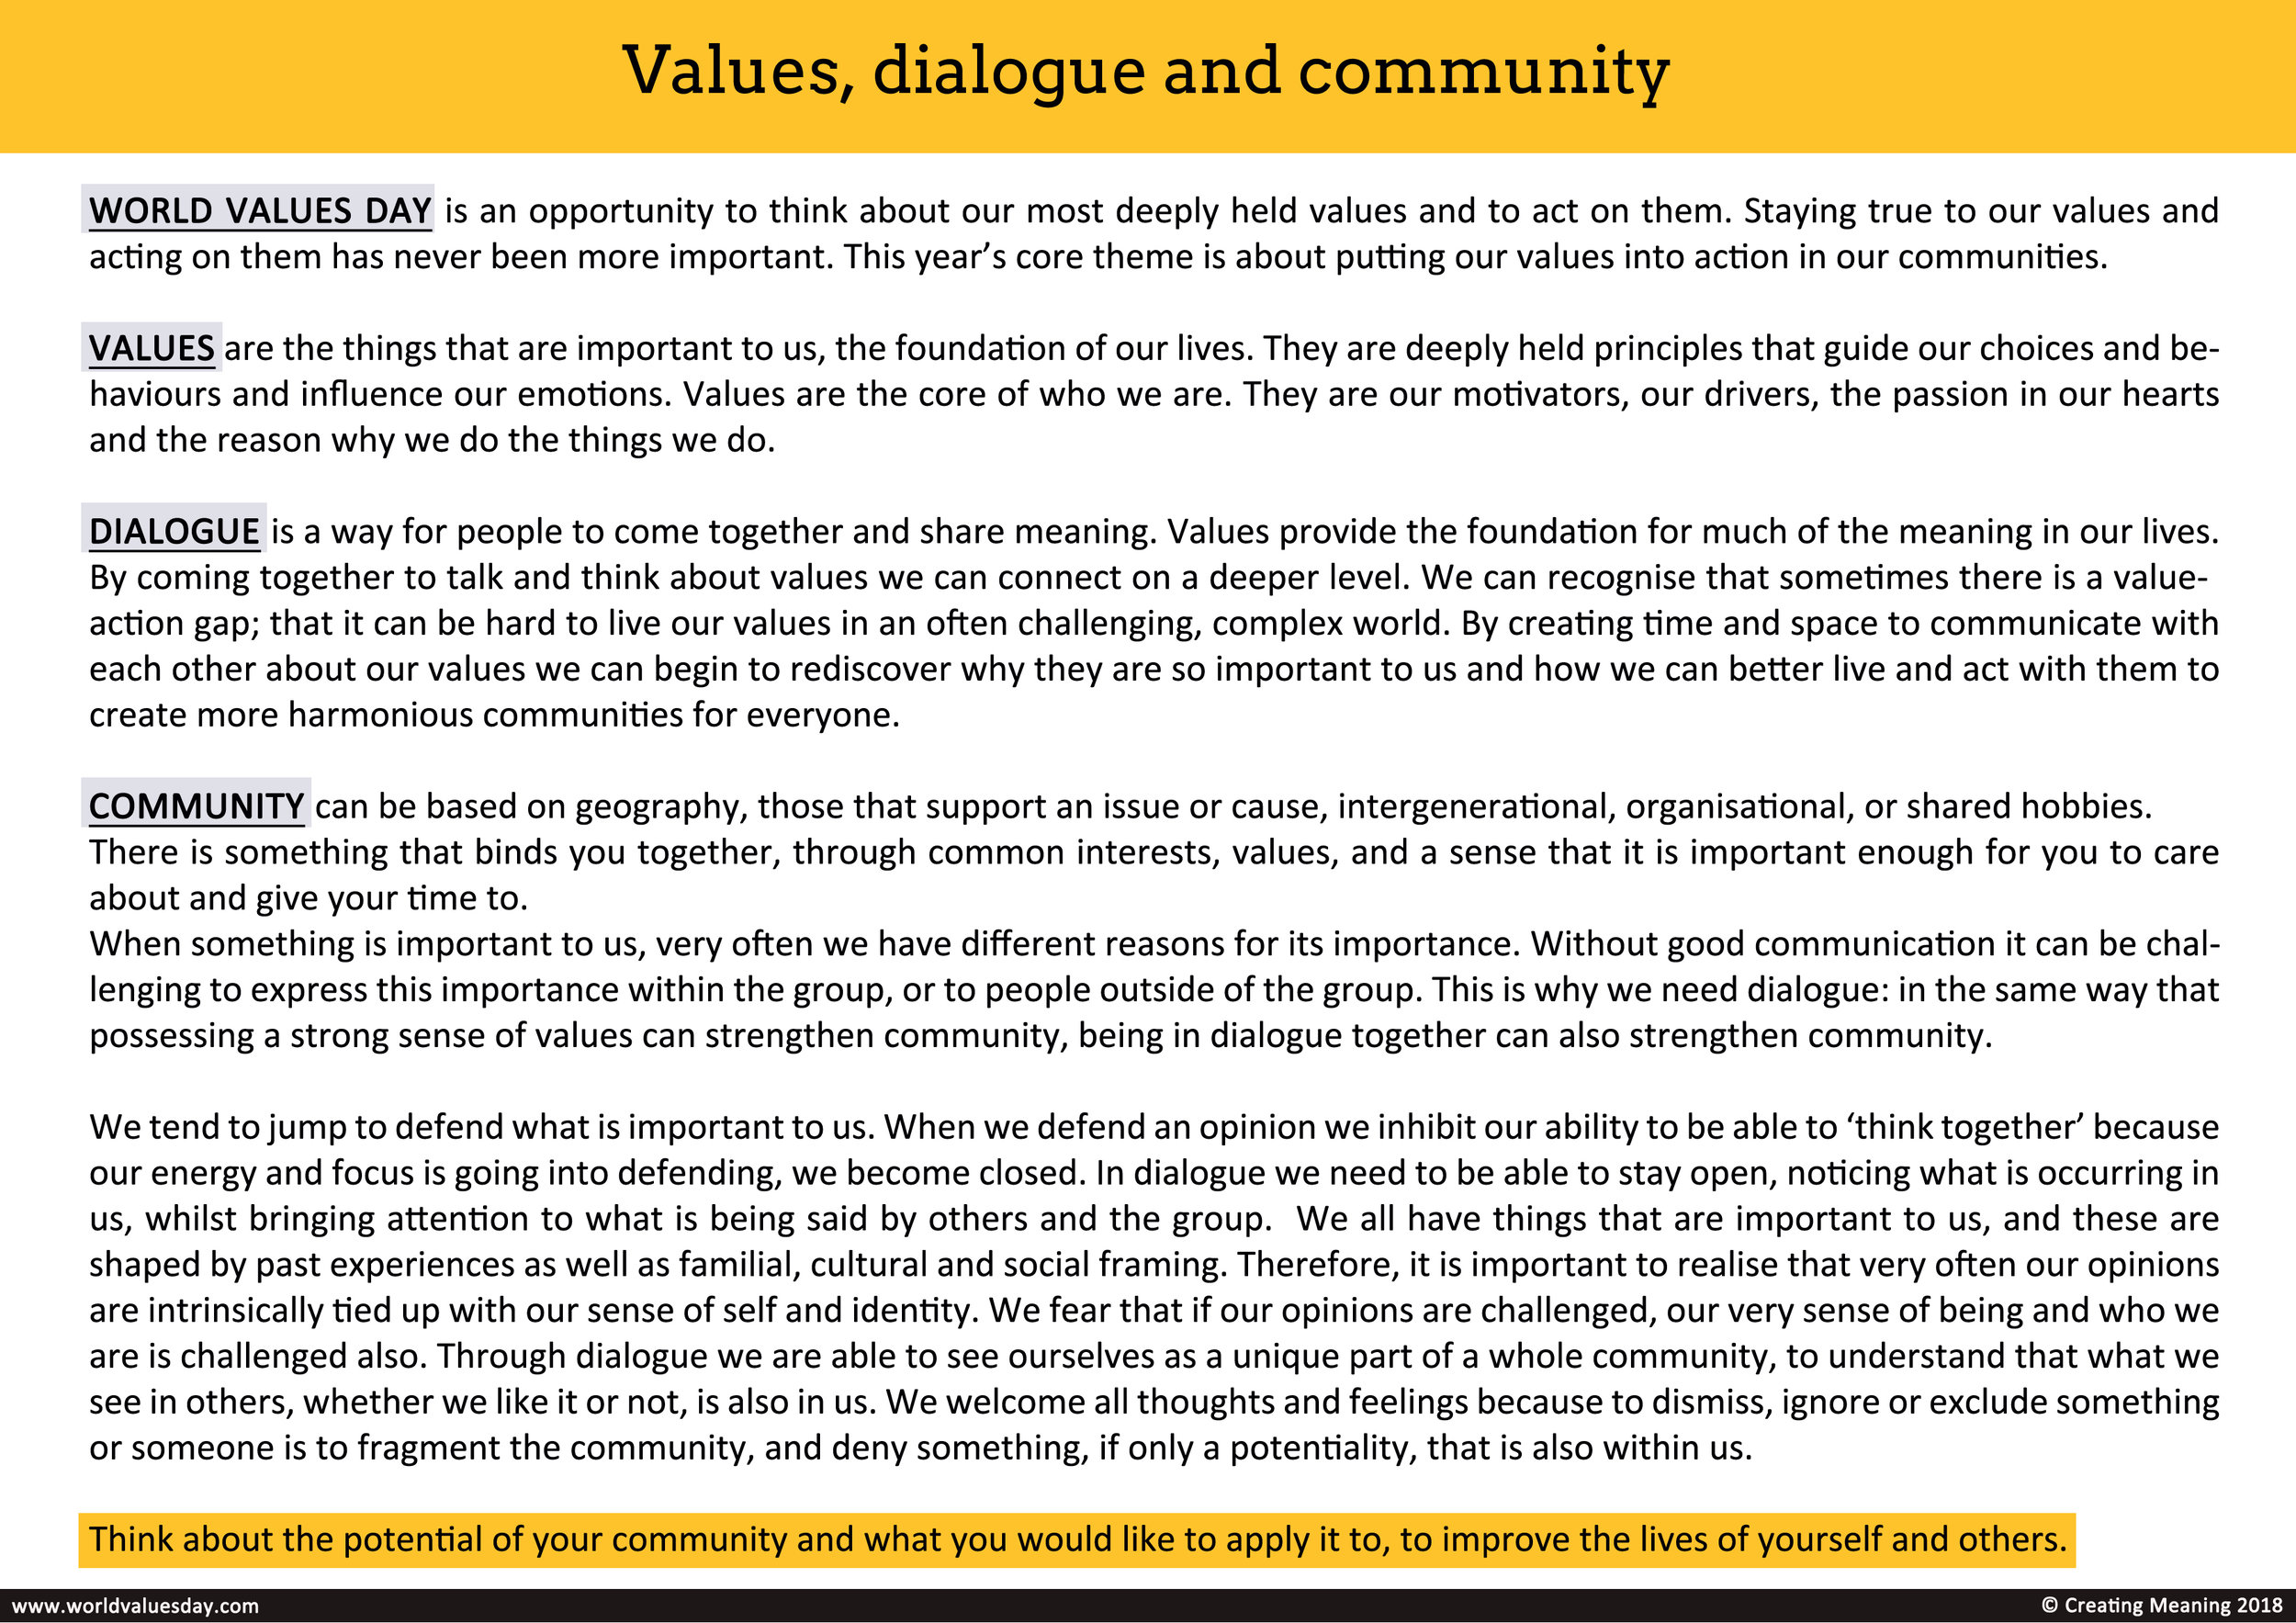 3 values dialogue and community.jpg